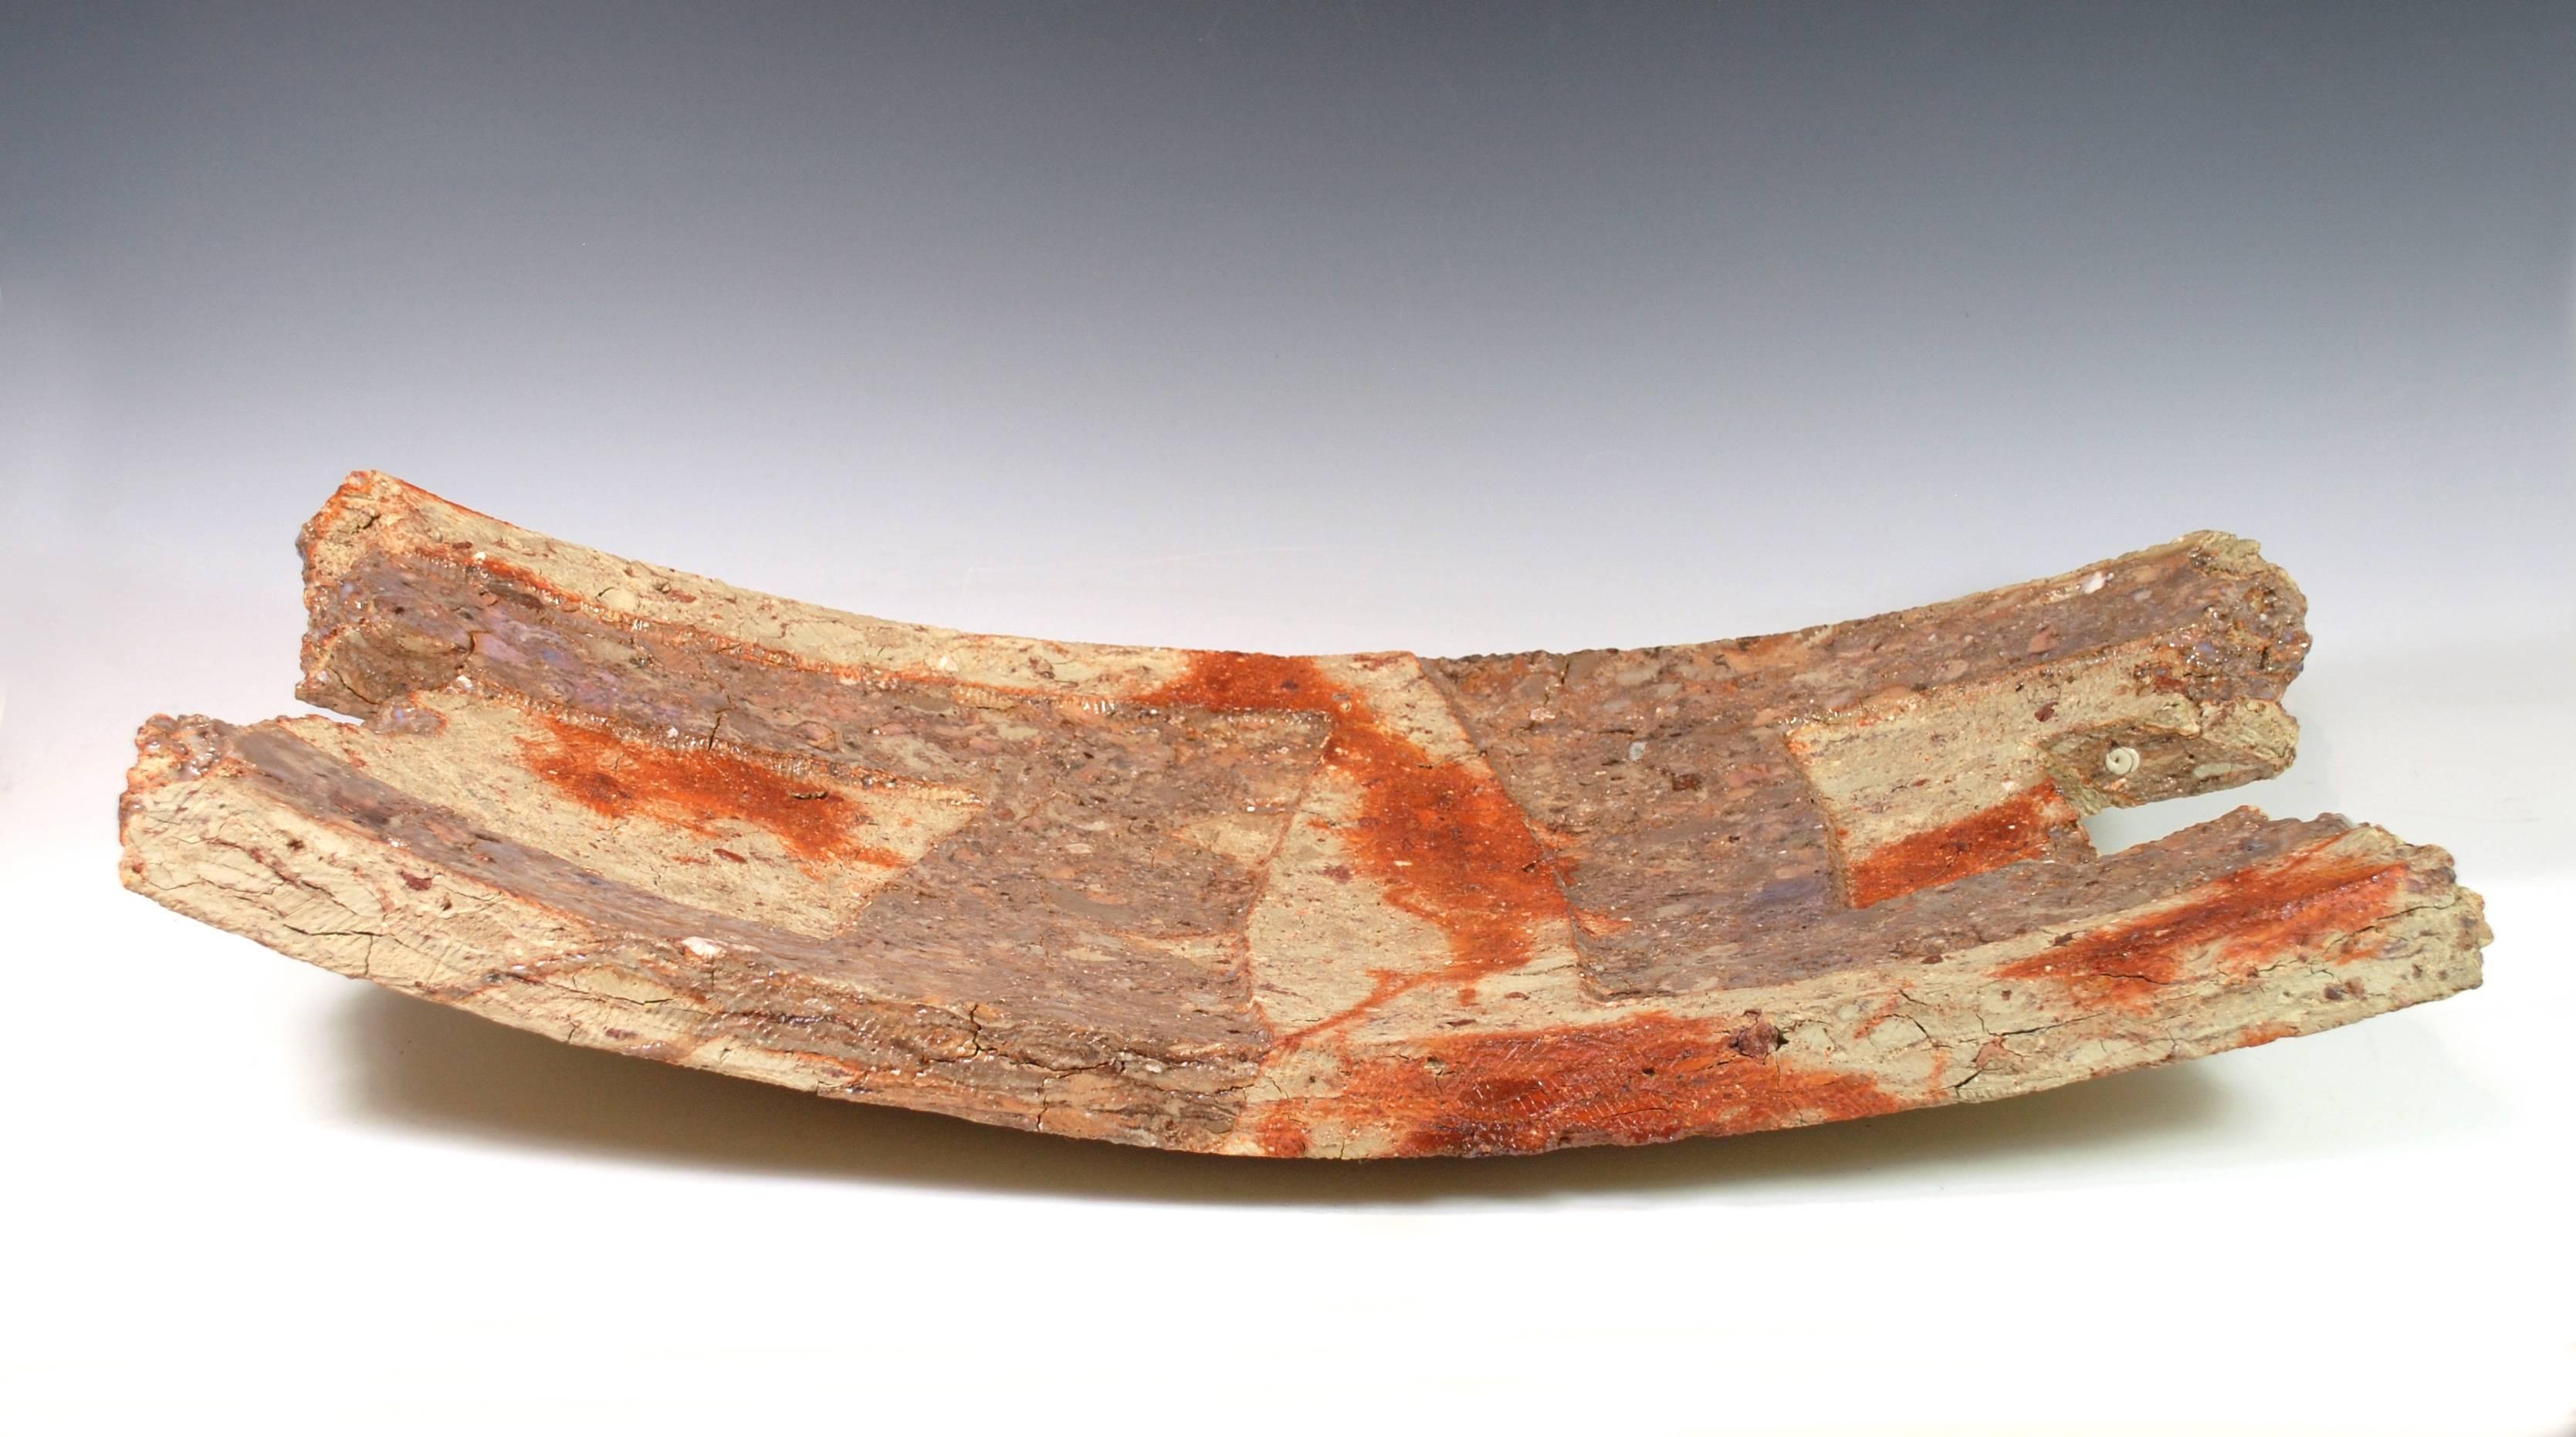 Offered by J R Richards
Here is a large stoneware rectangular shaped platter by celebrated contemporary artist Kakurezaki Ryuichi (b. 1950-).
The combining of clays, as well as the ash glaze effects, renders this a stunning piece of art. Viewed as